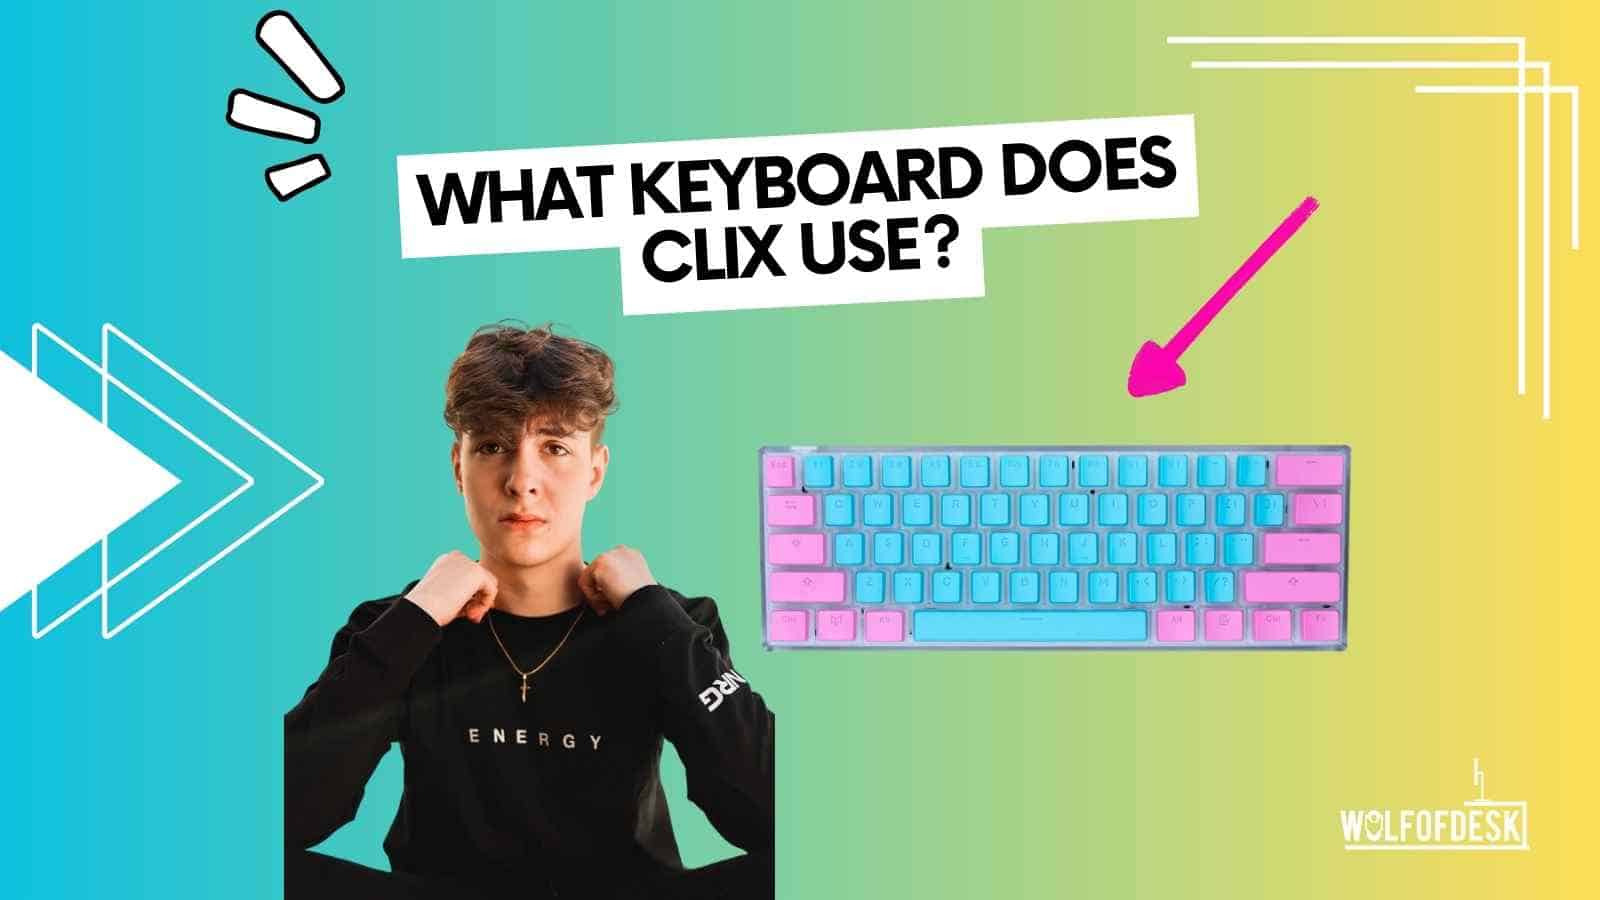 what keyboards does clix use while gaming? - answered